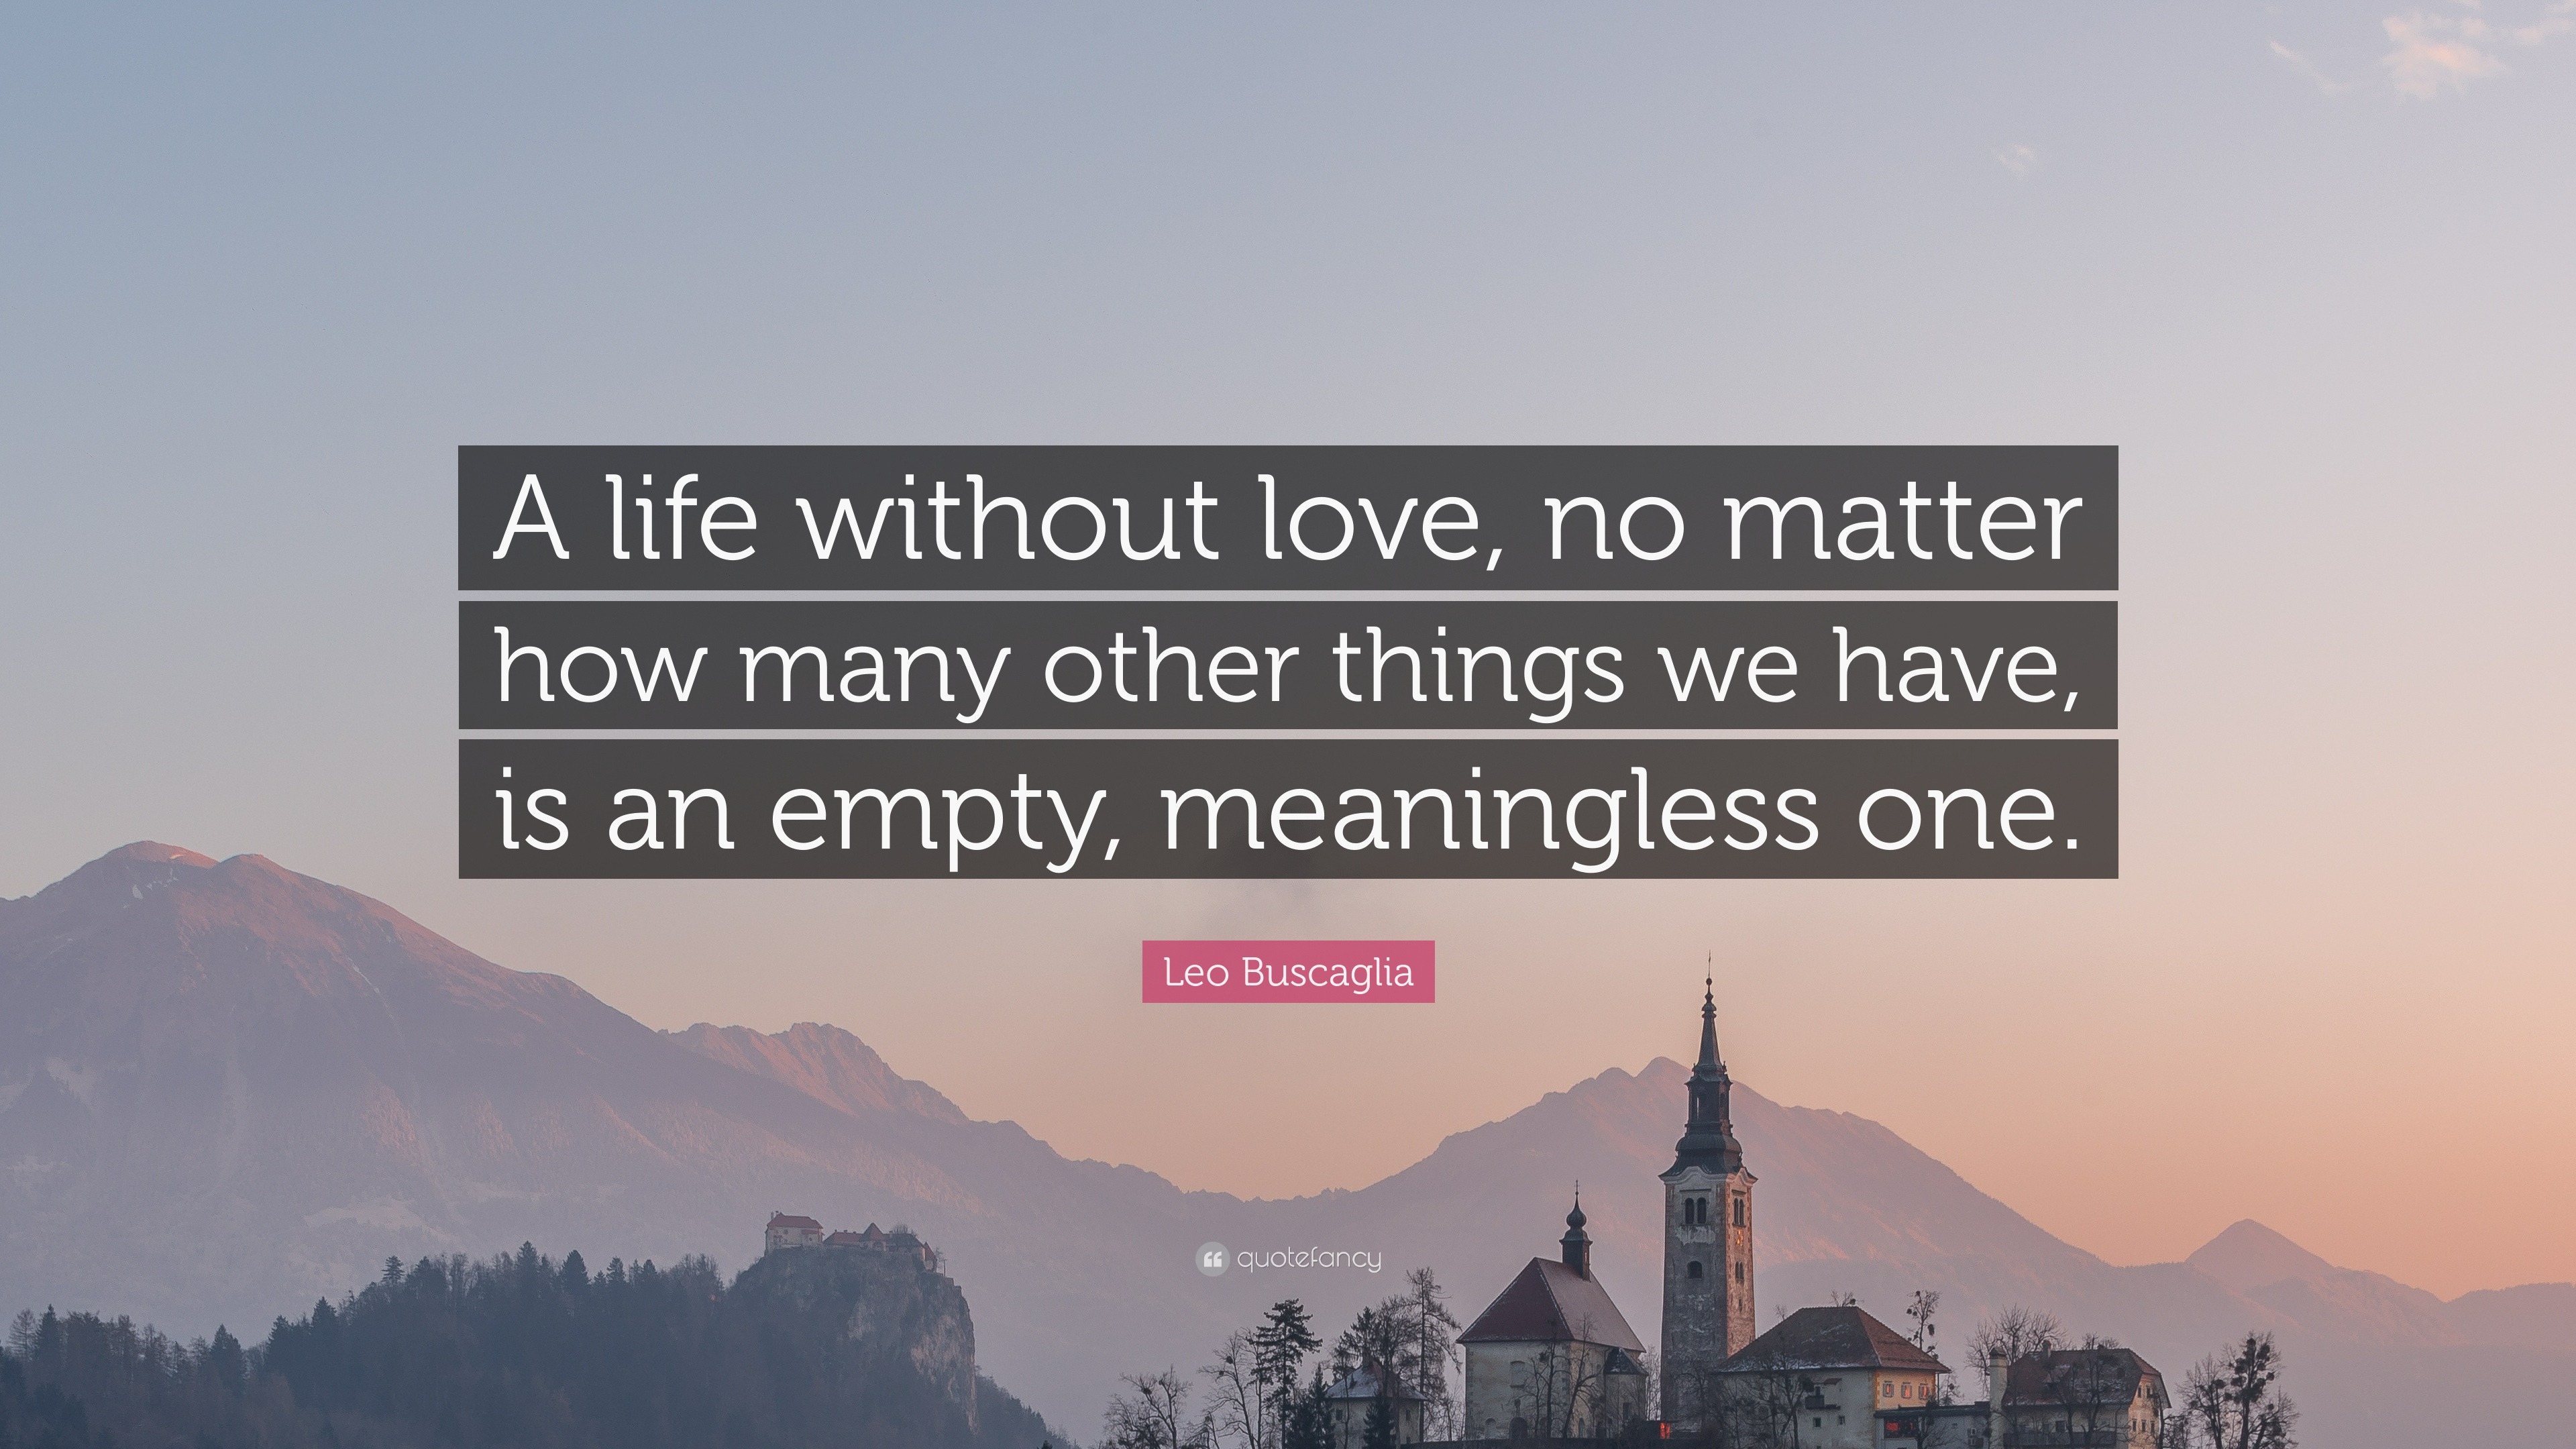 Leo Buscaglia Quote “A life without love no matter how many other things